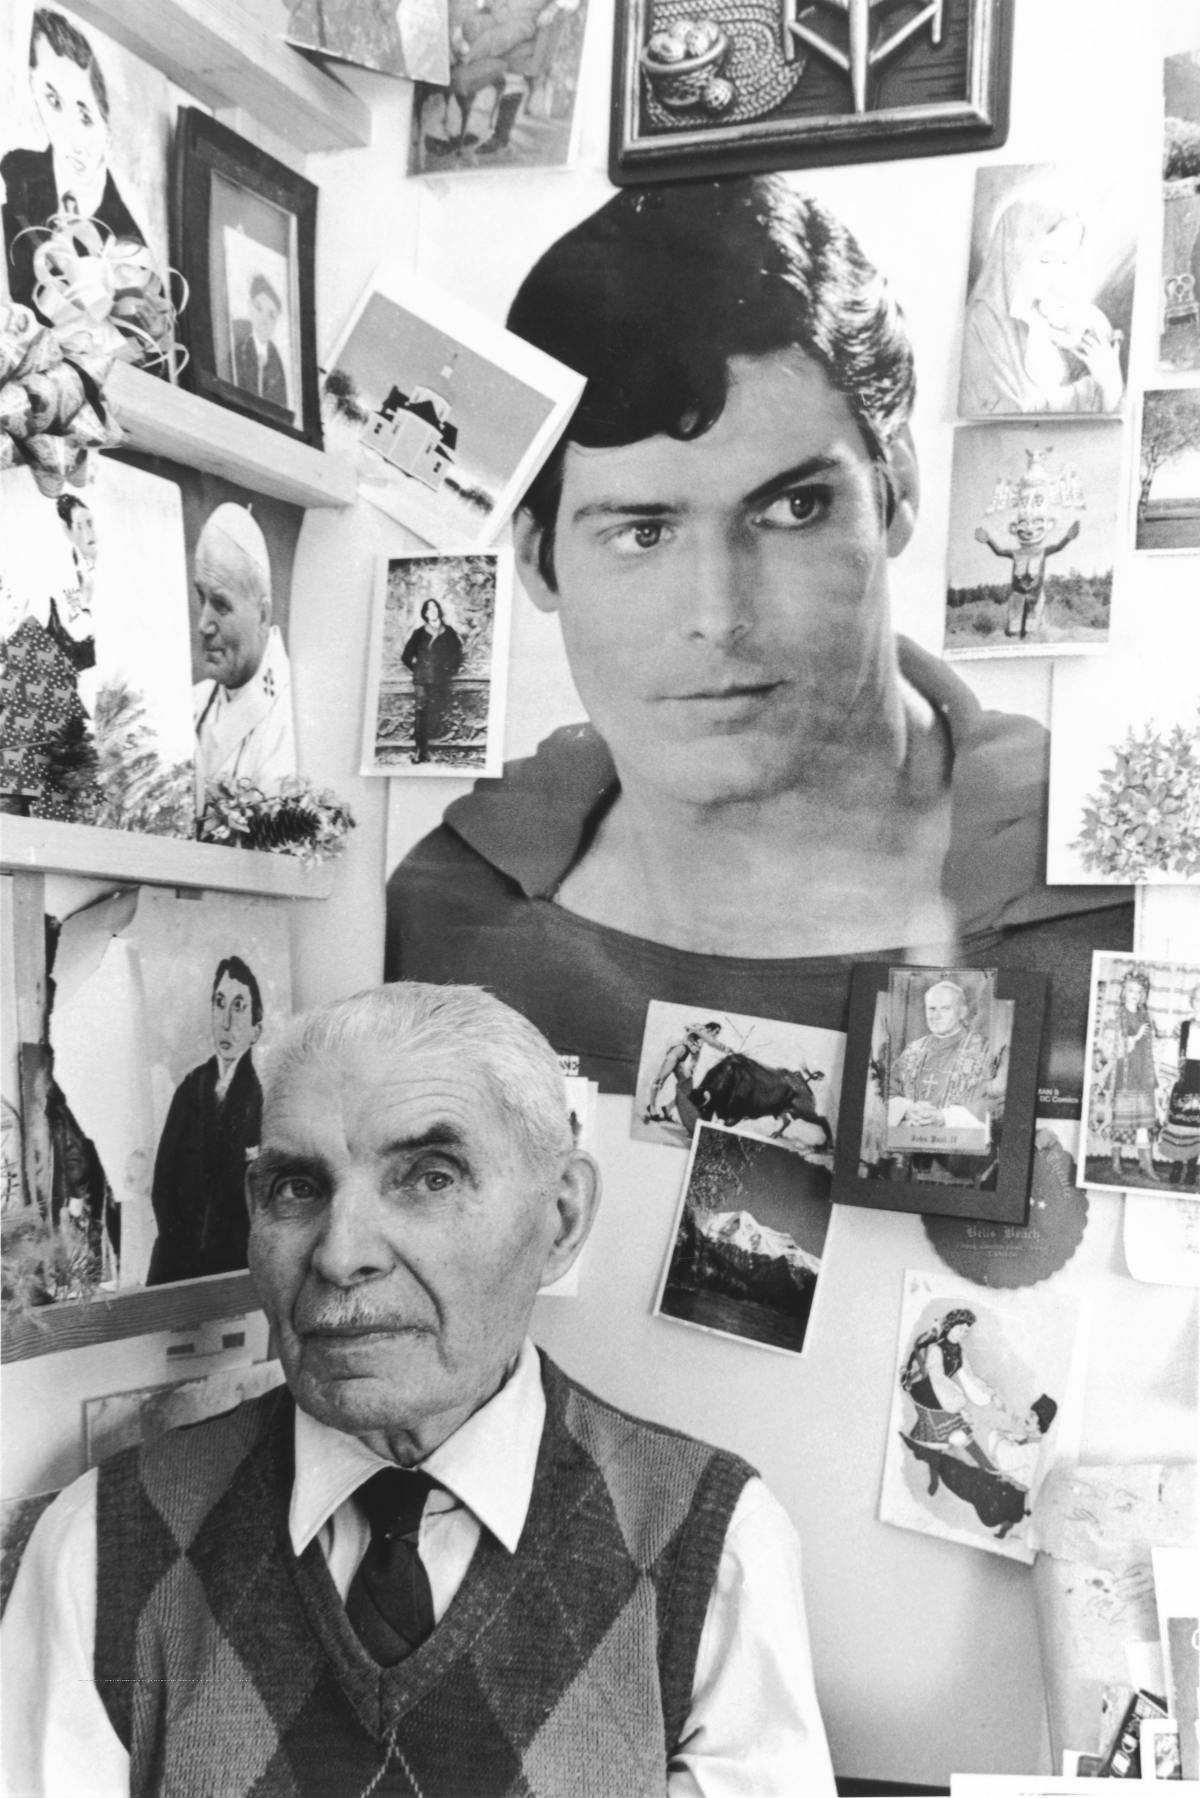 Black and white photo of elderly man, head and shoulders only. Behind him is a large picture of Superman and about a dozen other small paintings.